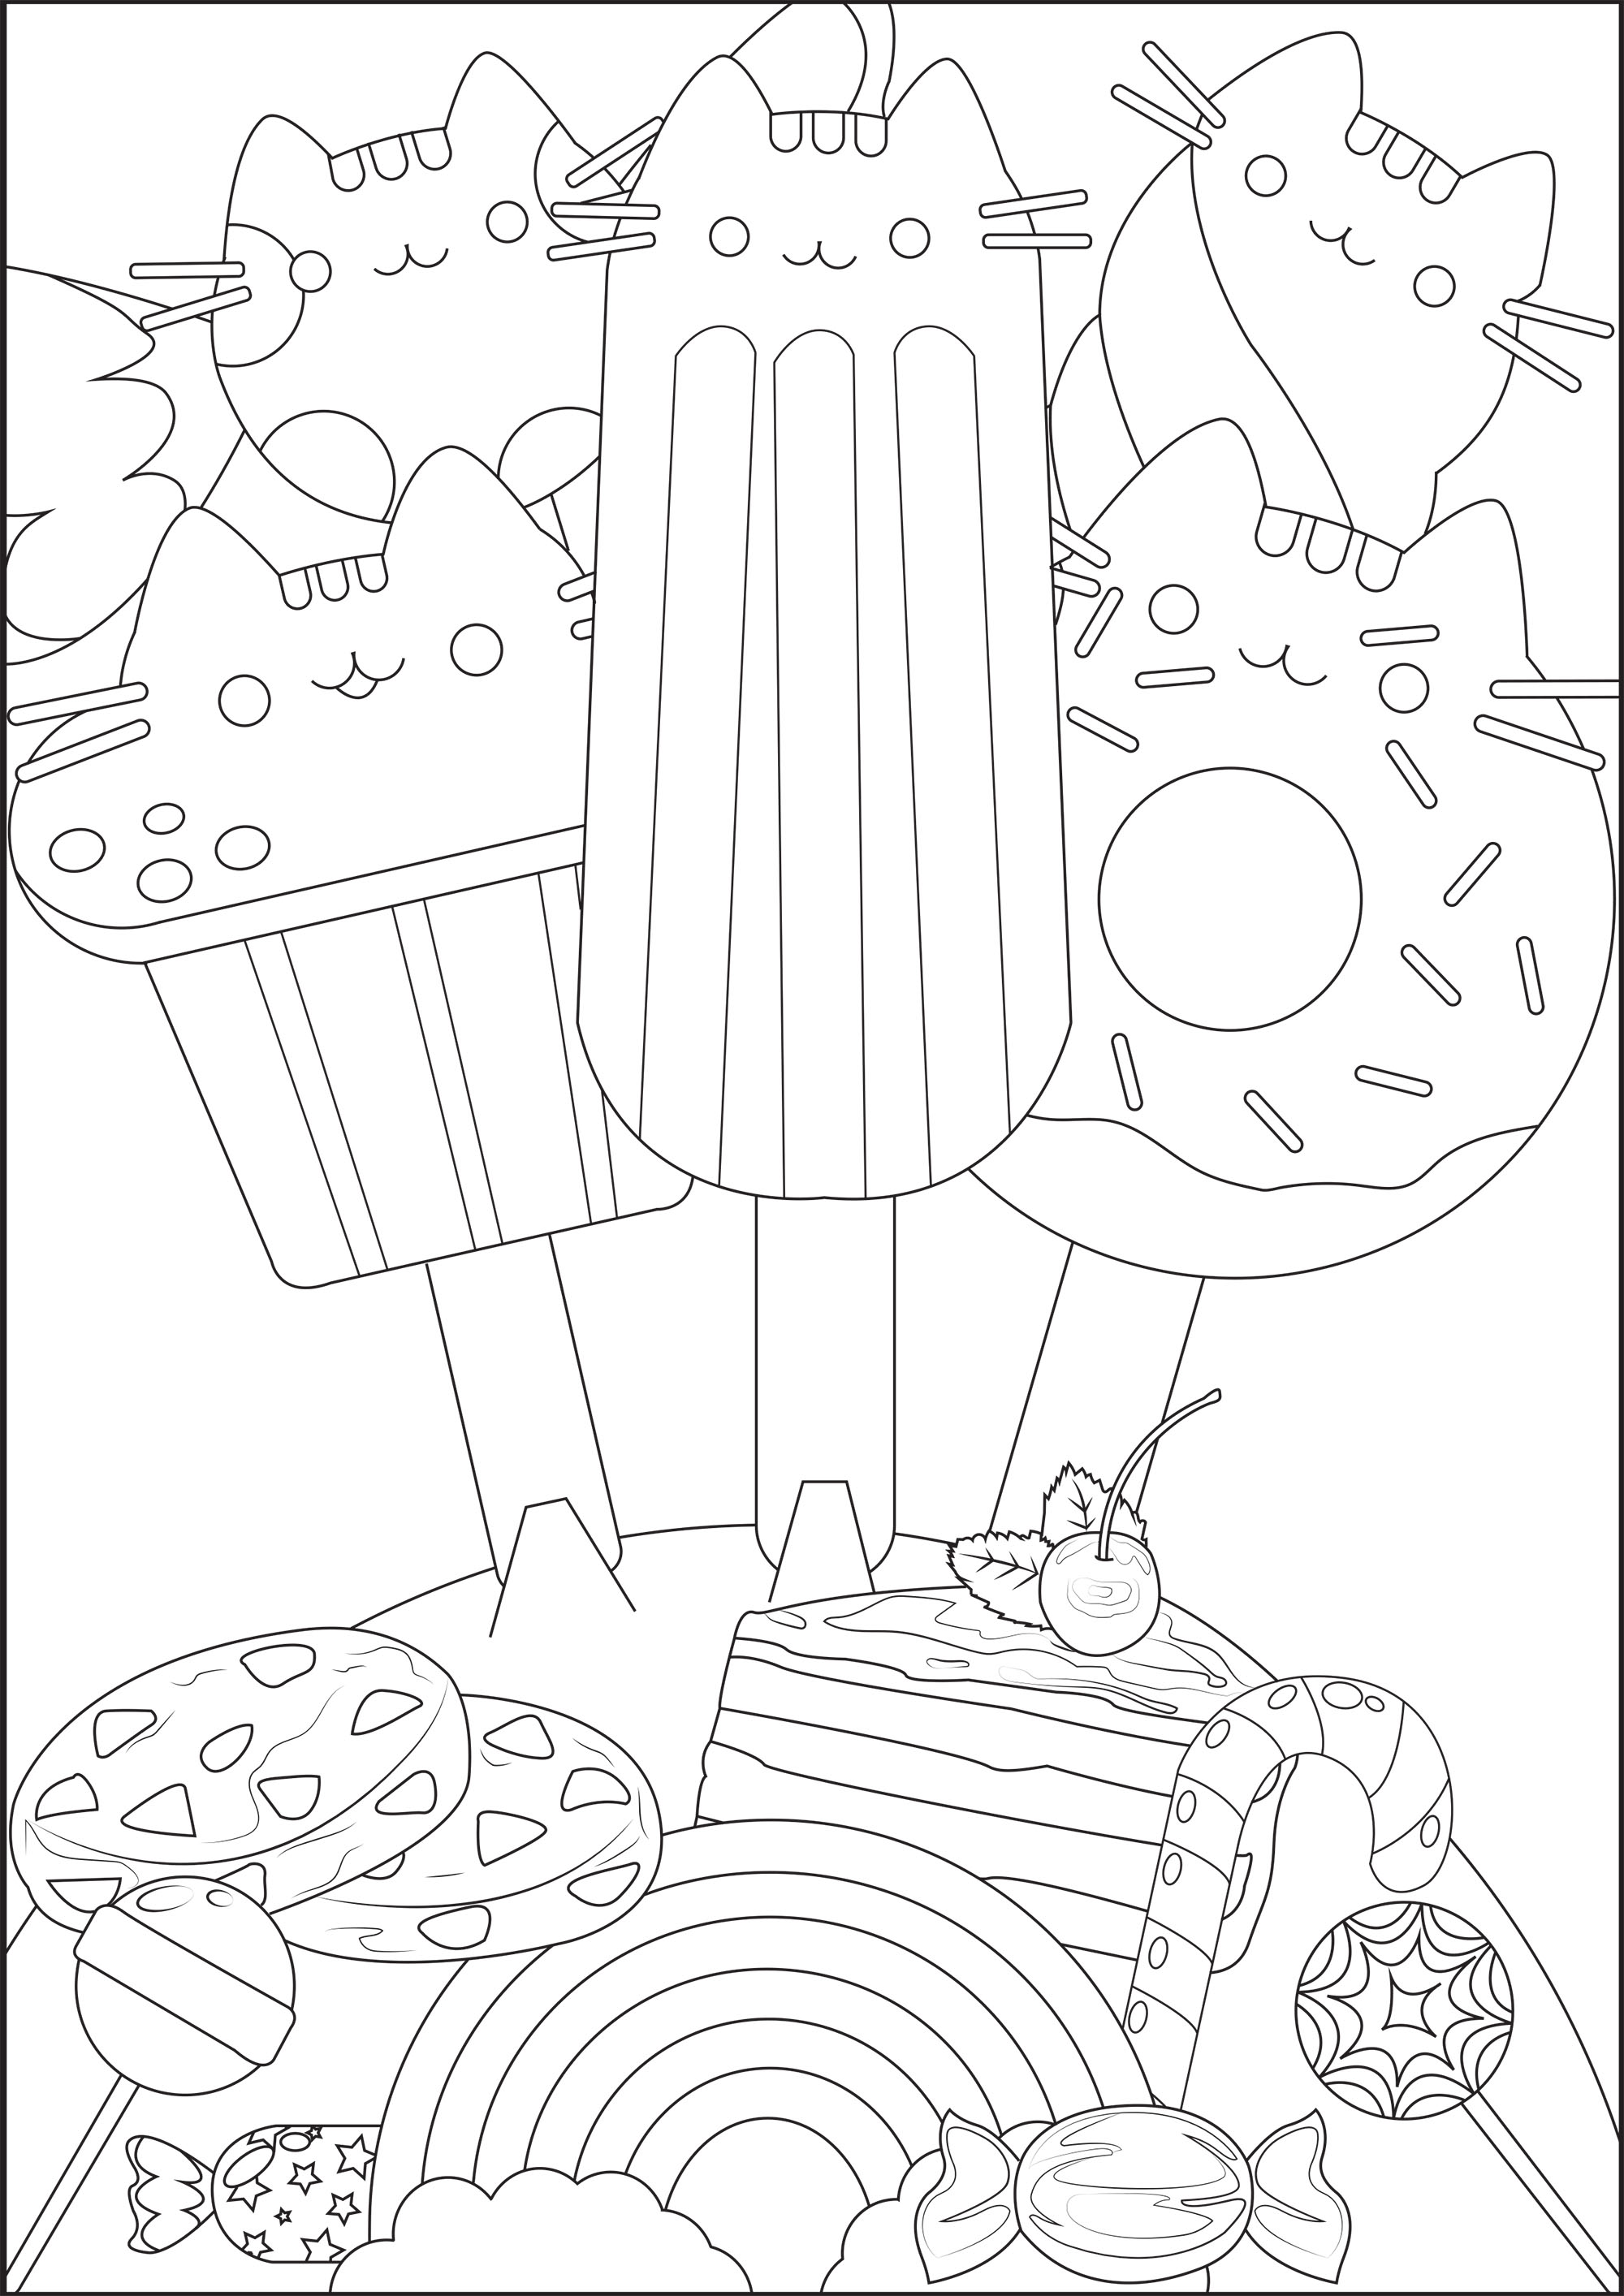 Pusheen - Coloring Pages for Adults